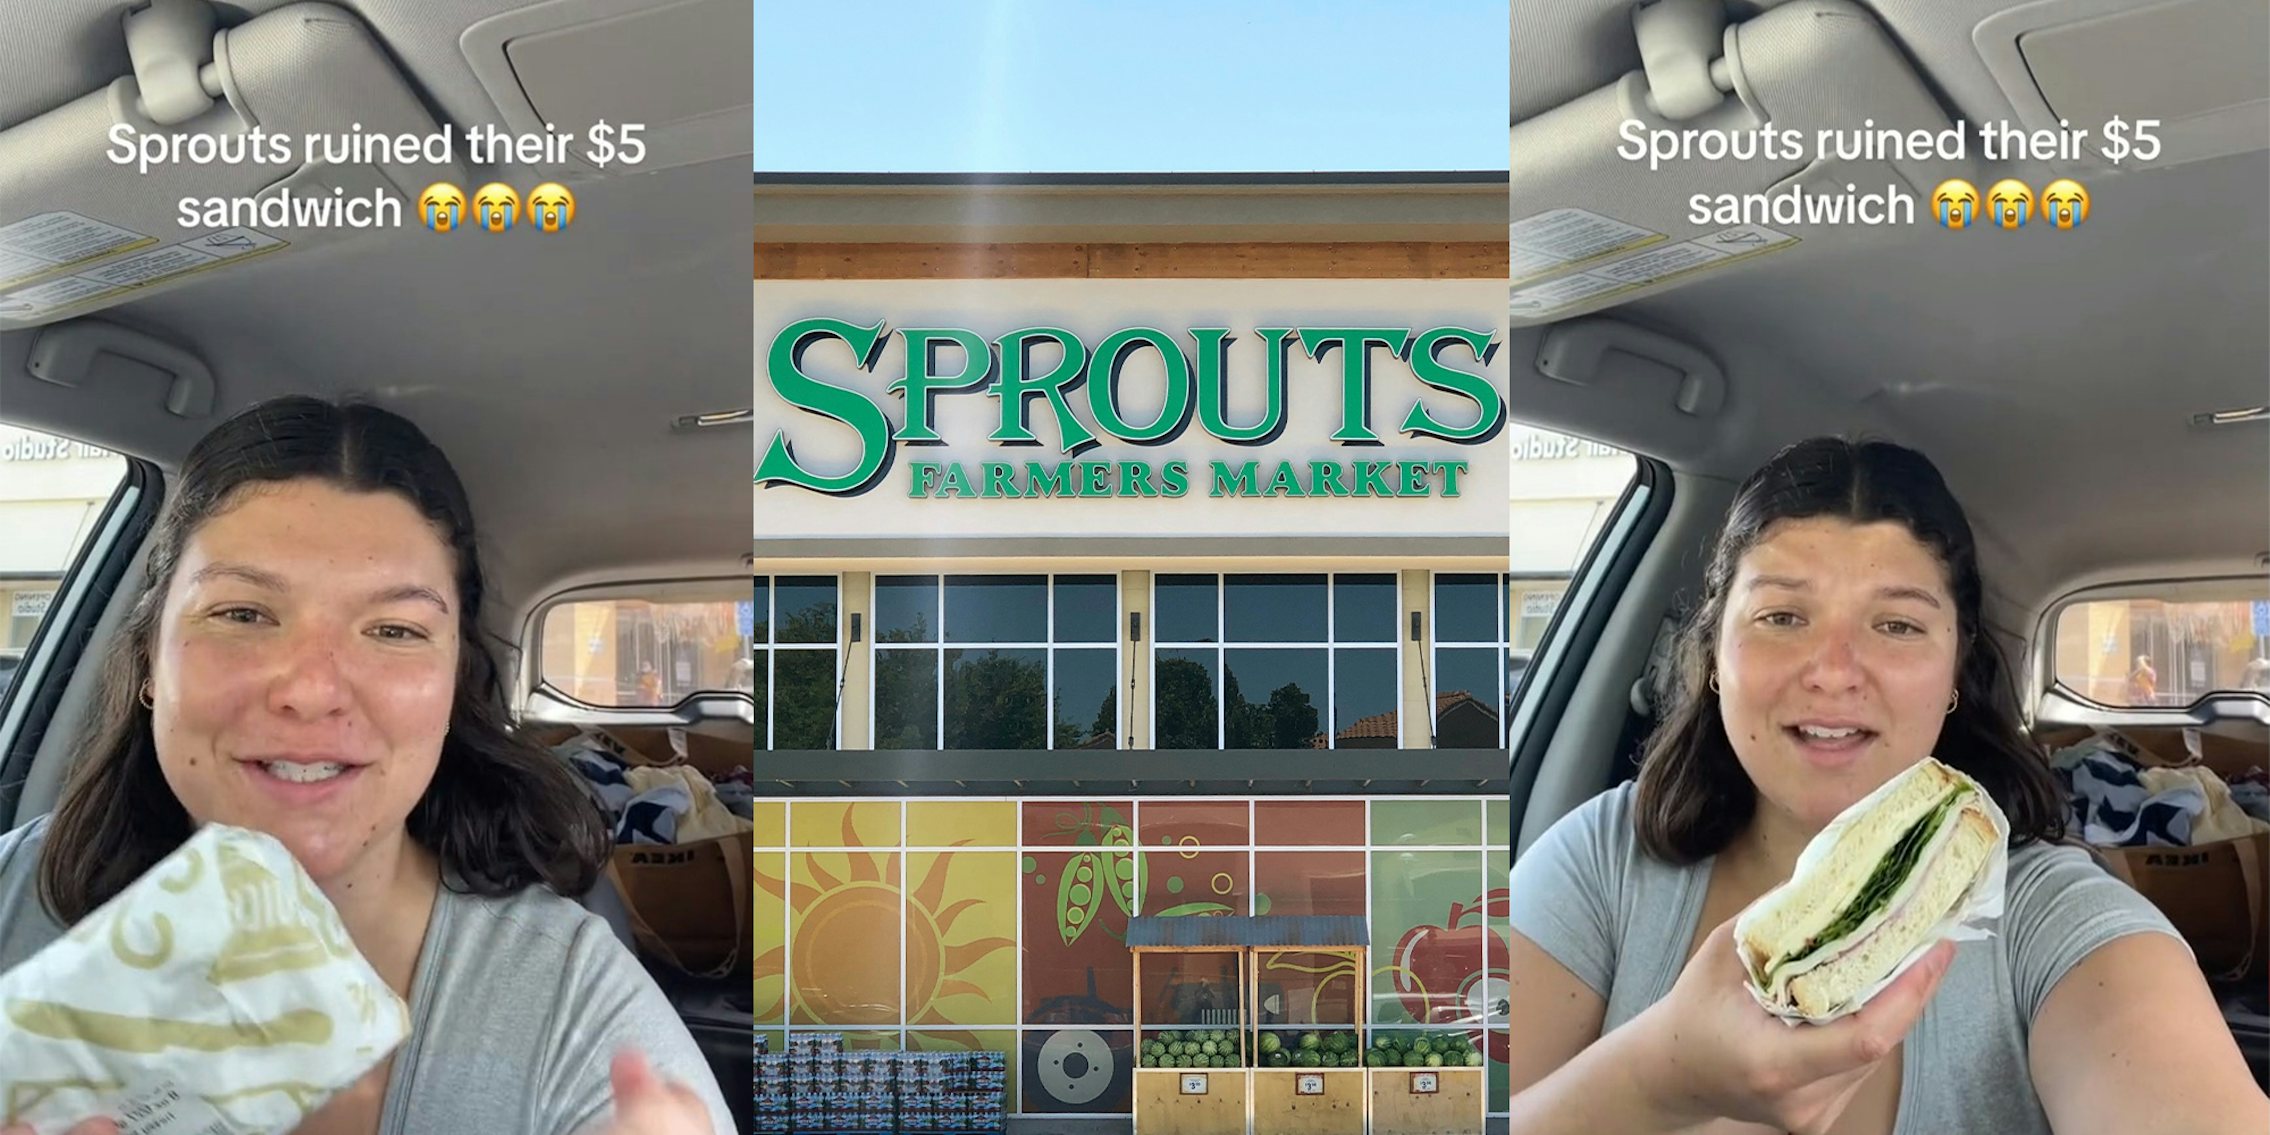 Sprouts customer says store ruined the viral $5 sandwich